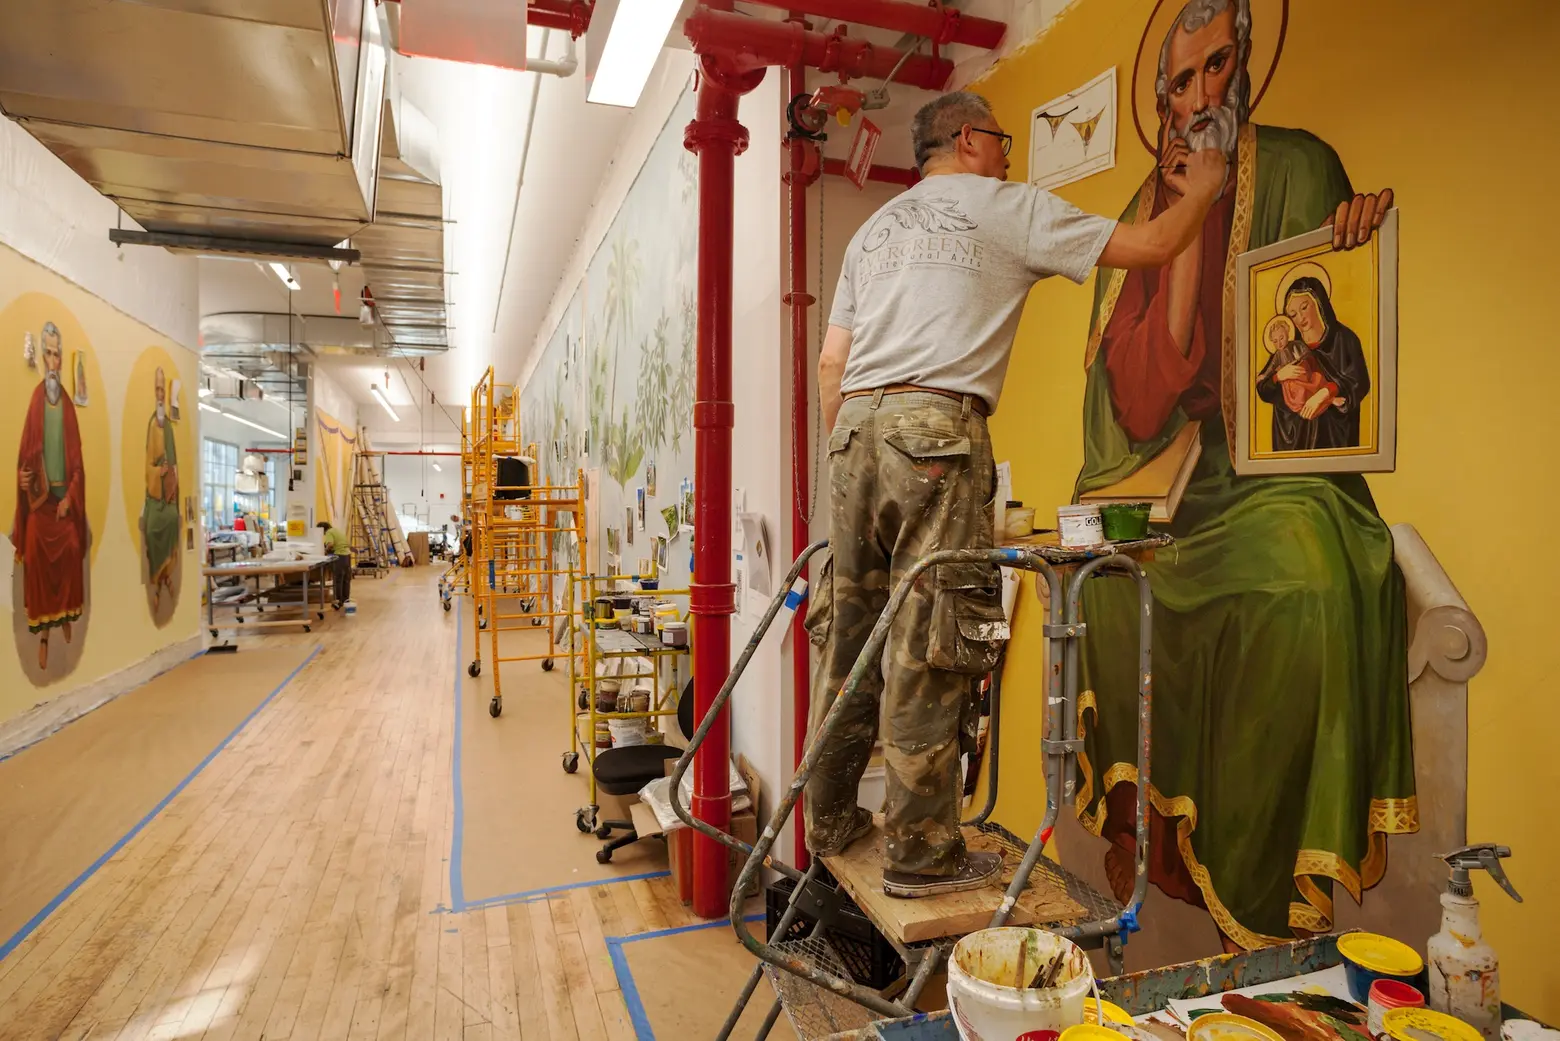 Where I Work: Inside the plaster and mural studios at Evergreene Architectural Arts